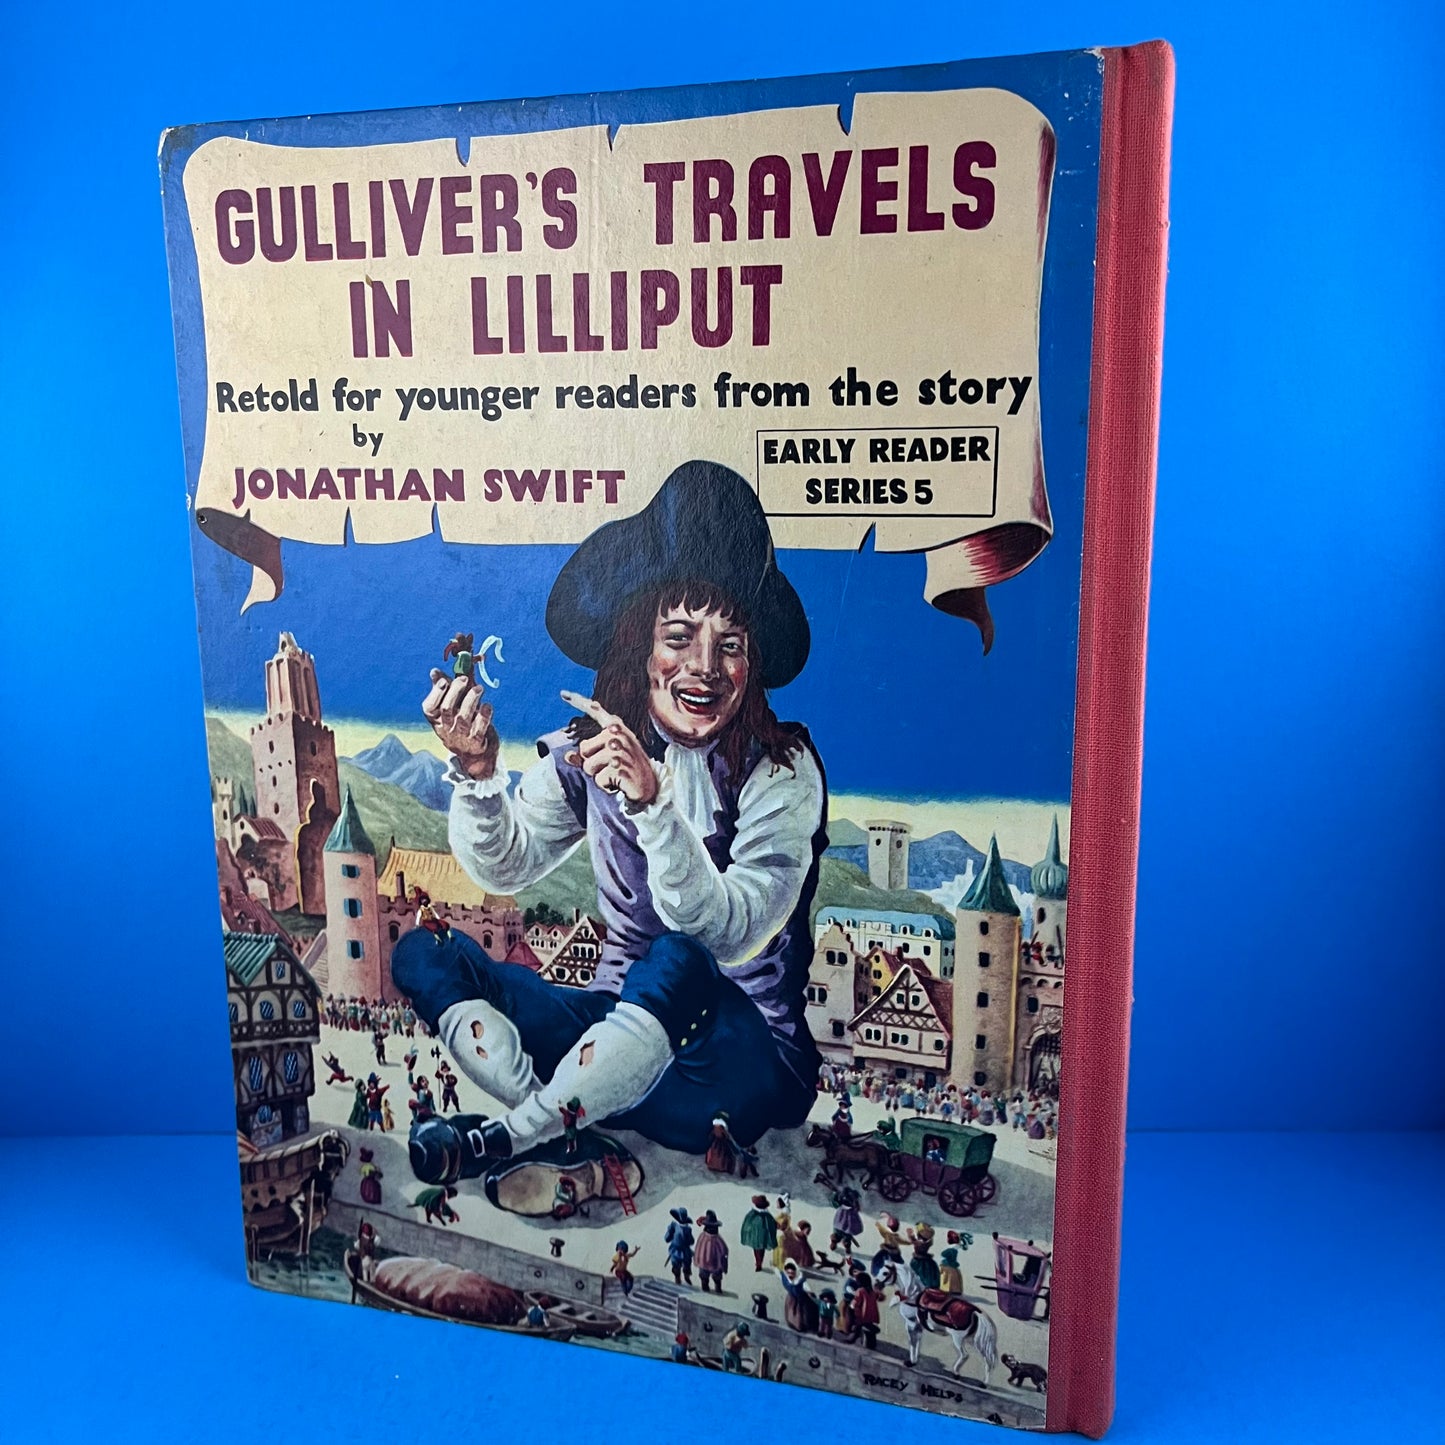 Gulliver's Travels in Lilliput: Retold for Younger Readers